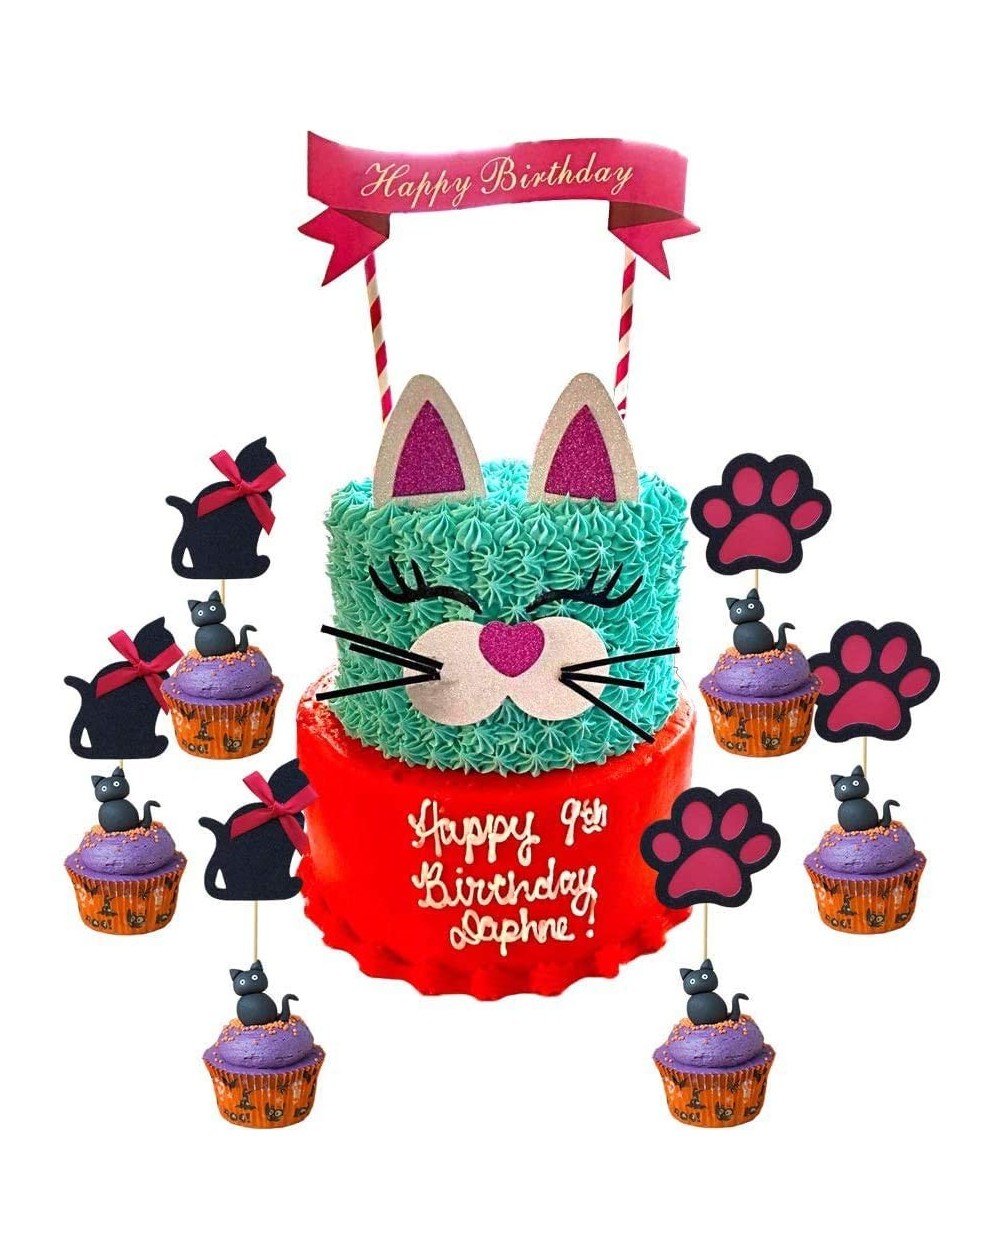 Cake & Cupcake Toppers 1 Set Glitter Cat Cake Topper Decoration And 6Pcs Kitty Cupcake Toppers and Baby Shower Cake Decoratio...